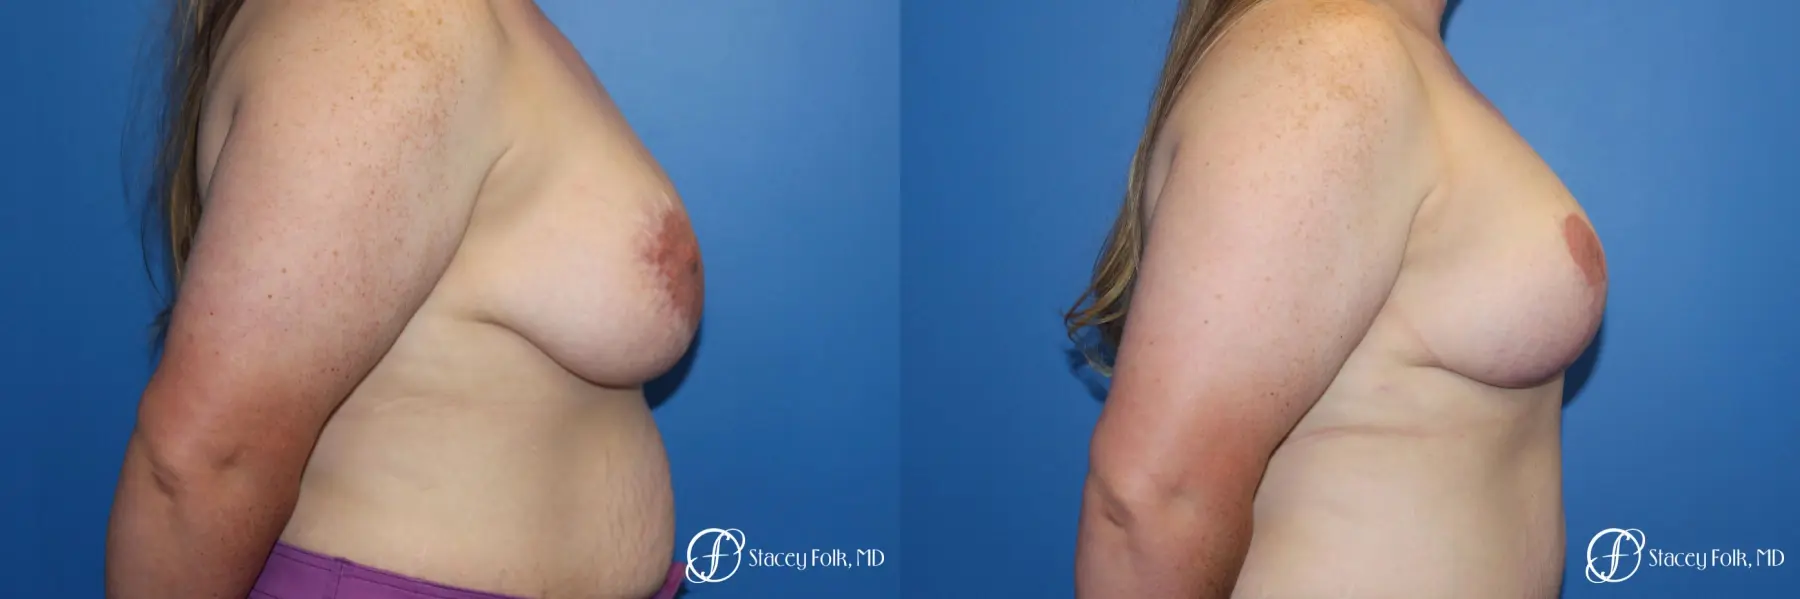 Breast Lift (Mastopexy) - Before and After 3